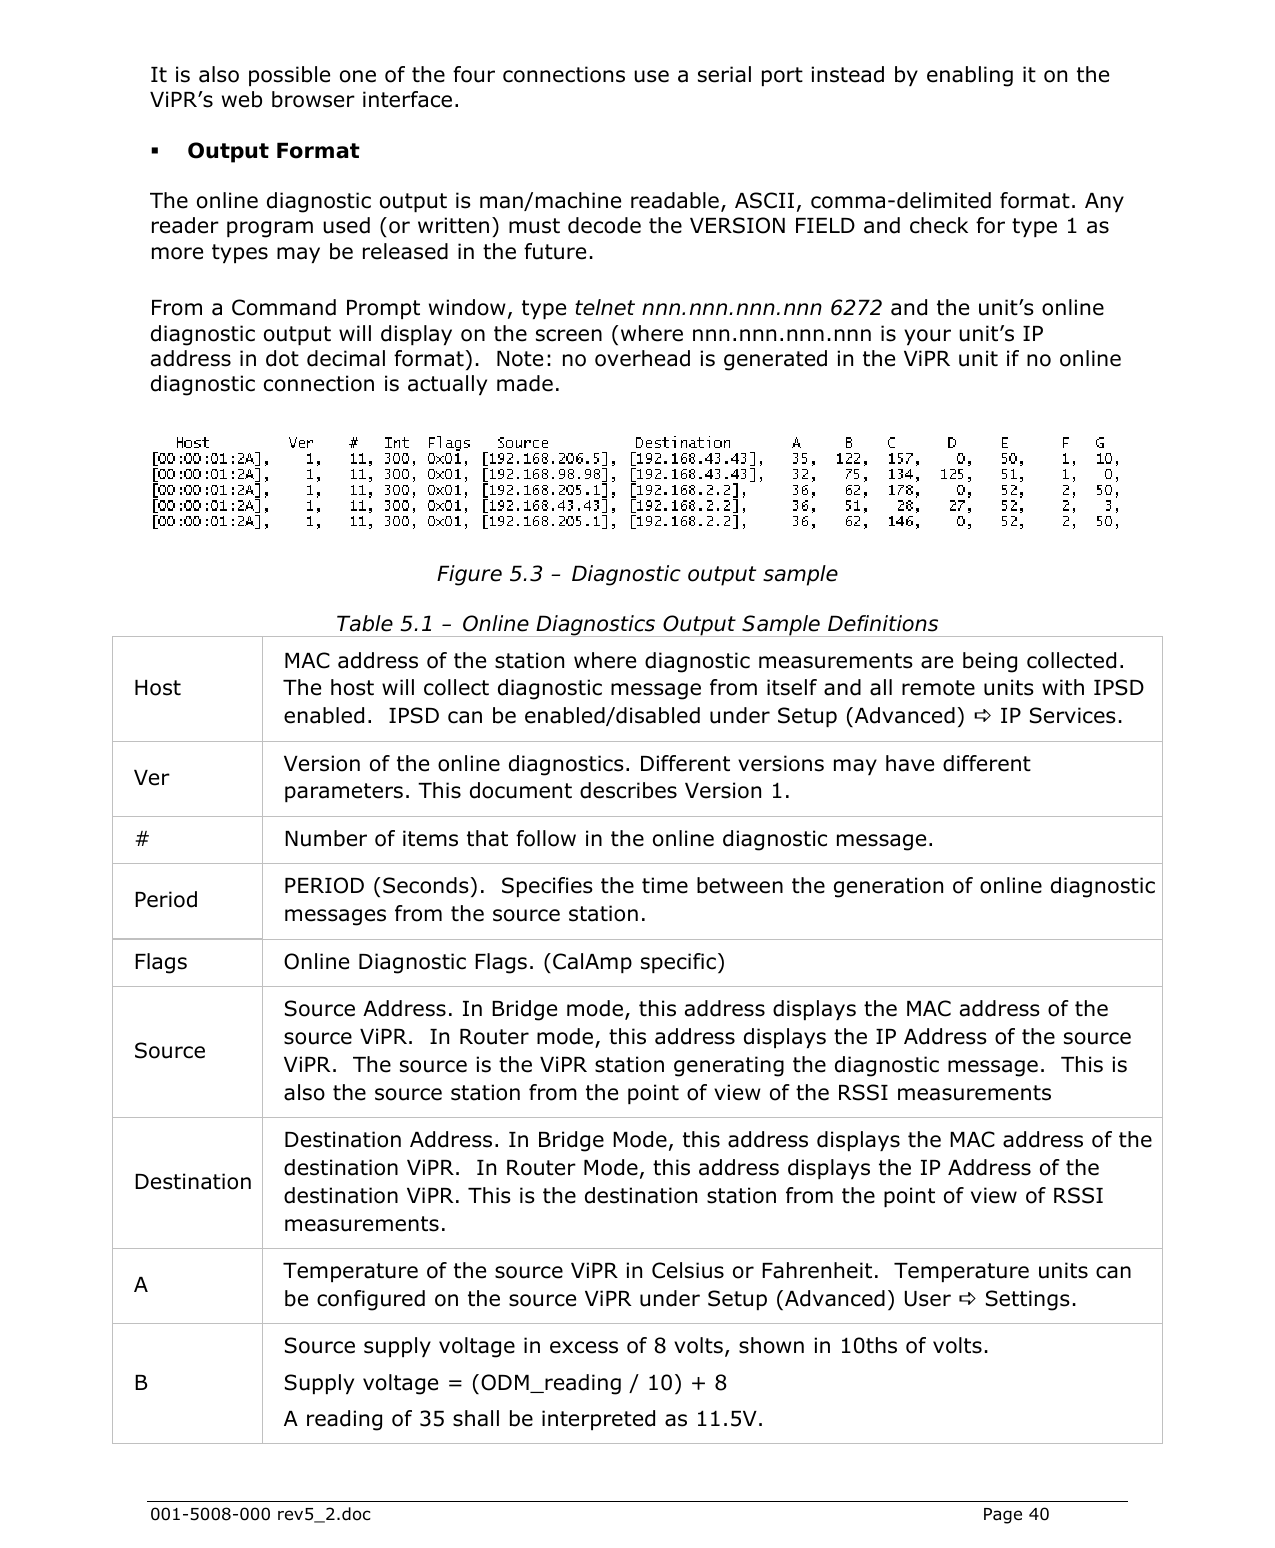  001-5008-000 rev5_2.doc    Page 40 It is also possible one of the four connections use a serial port instead by enabling it on the ViPR’s web browser interface.   Output Format The online diagnostic output is man/machine readable, ASCII, comma-delimited format. Any reader program used (or written) must decode the VERSION FIELD and check for type 1 as more types may be released in the future.   From a Command Prompt window, type telnet nnn.nnn.nnn.nnn 6272 and the unit’s online diagnostic output will display on the screen (where nnn.nnn.nnn.nnn is your unit’s IP address in dot decimal format).  Note: no overhead is generated in the ViPR unit if no online diagnostic connection is actually made.   Figure 5.3 – Diagnostic output sample Table 5.1 – Online Diagnostics Output Sample Definitions Host MAC address of the station where diagnostic measurements are being collected.  The host will collect diagnostic message from itself and all remote units with IPSD enabled.  IPSD can be enabled/disabled under Setup (Advanced) D IP Services.  Ver  Version of the online diagnostics. Different versions may have different parameters. This document describes Version 1.  #  Number of items that follow in the online diagnostic message. Period  PERIOD (Seconds).  Specifies the time between the generation of online diagnostic messages from the source station. Flags  Online Diagnostic Flags. (CalAmp specific) Source Source Address. In Bridge mode, this address displays the MAC address of the source ViPR.  In Router mode, this address displays the IP Address of the source ViPR.  The source is the ViPR station generating the diagnostic message.  This is also the source station from the point of view of the RSSI measurements Destination Destination Address. In Bridge Mode, this address displays the MAC address of the destination ViPR.  In Router Mode, this address displays the IP Address of the destination ViPR. This is the destination station from the point of view of RSSI measurements. A  Temperature of the source ViPR in Celsius or Fahrenheit.  Temperature units can be configured on the source ViPR under Setup (Advanced) User D Settings. B Source supply voltage in excess of 8 volts, shown in 10ths of volts.  Supply voltage = (ODM_reading / 10) + 8 A reading of 35 shall be interpreted as 11.5V. 